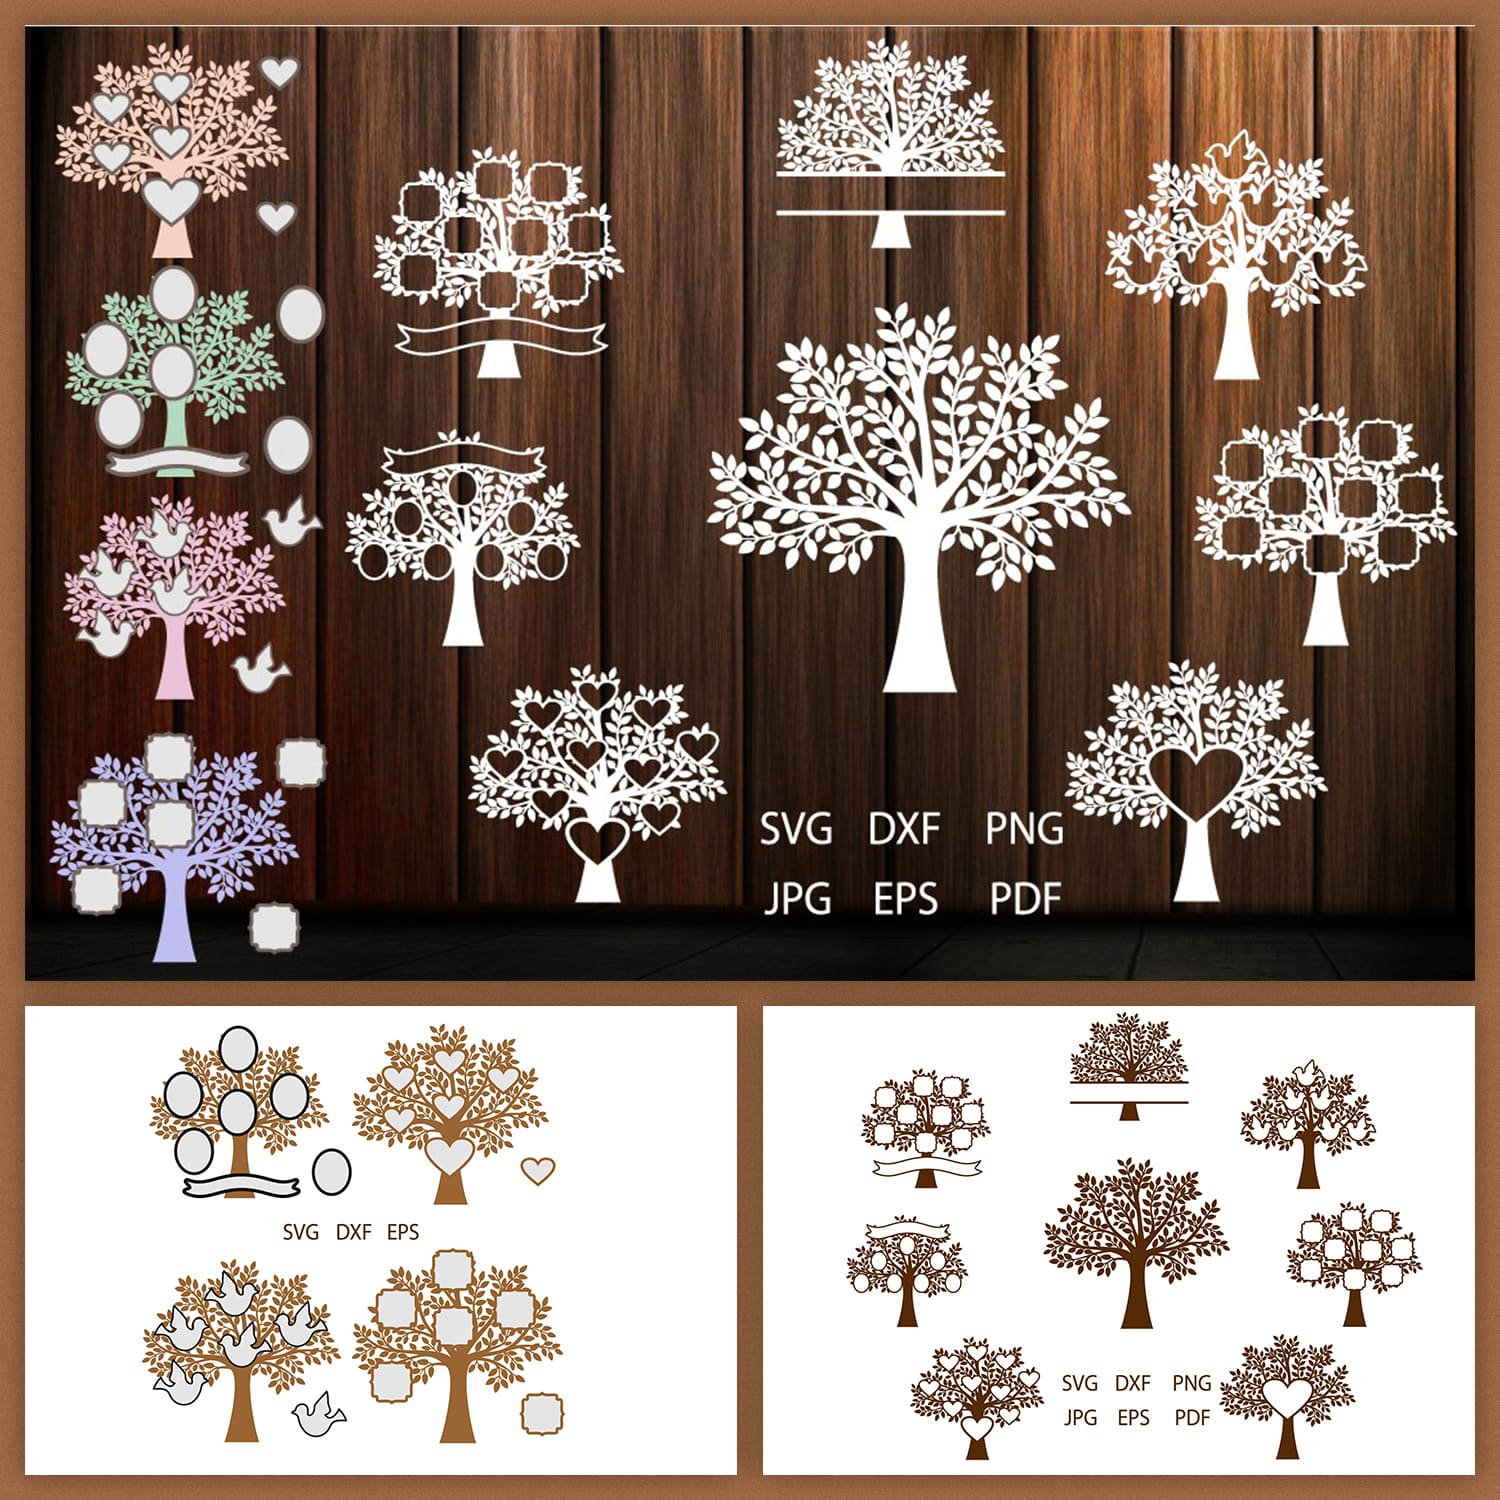 Nice family tree bundle for your design.